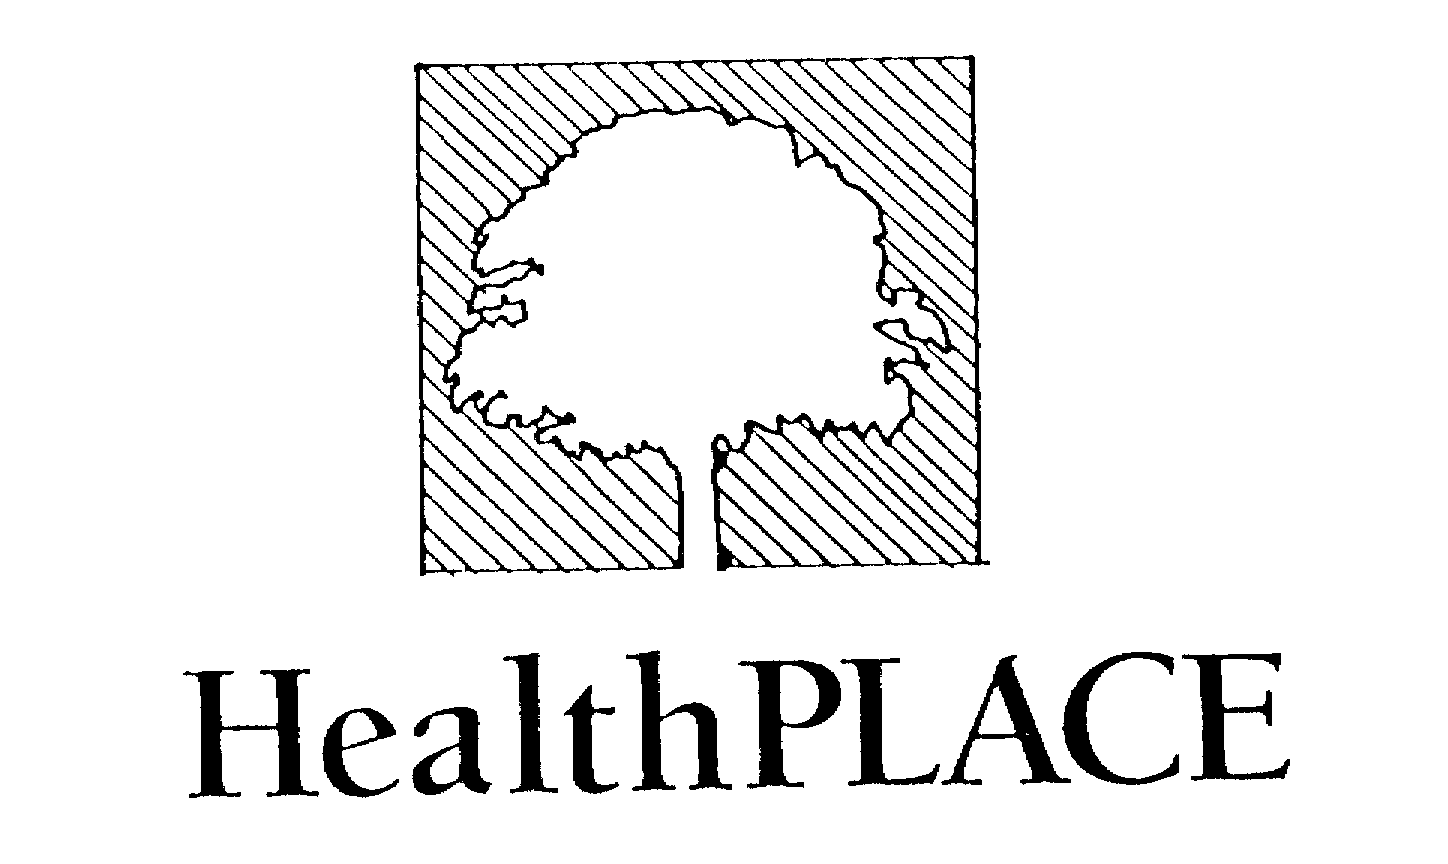  HEALTH PLACE